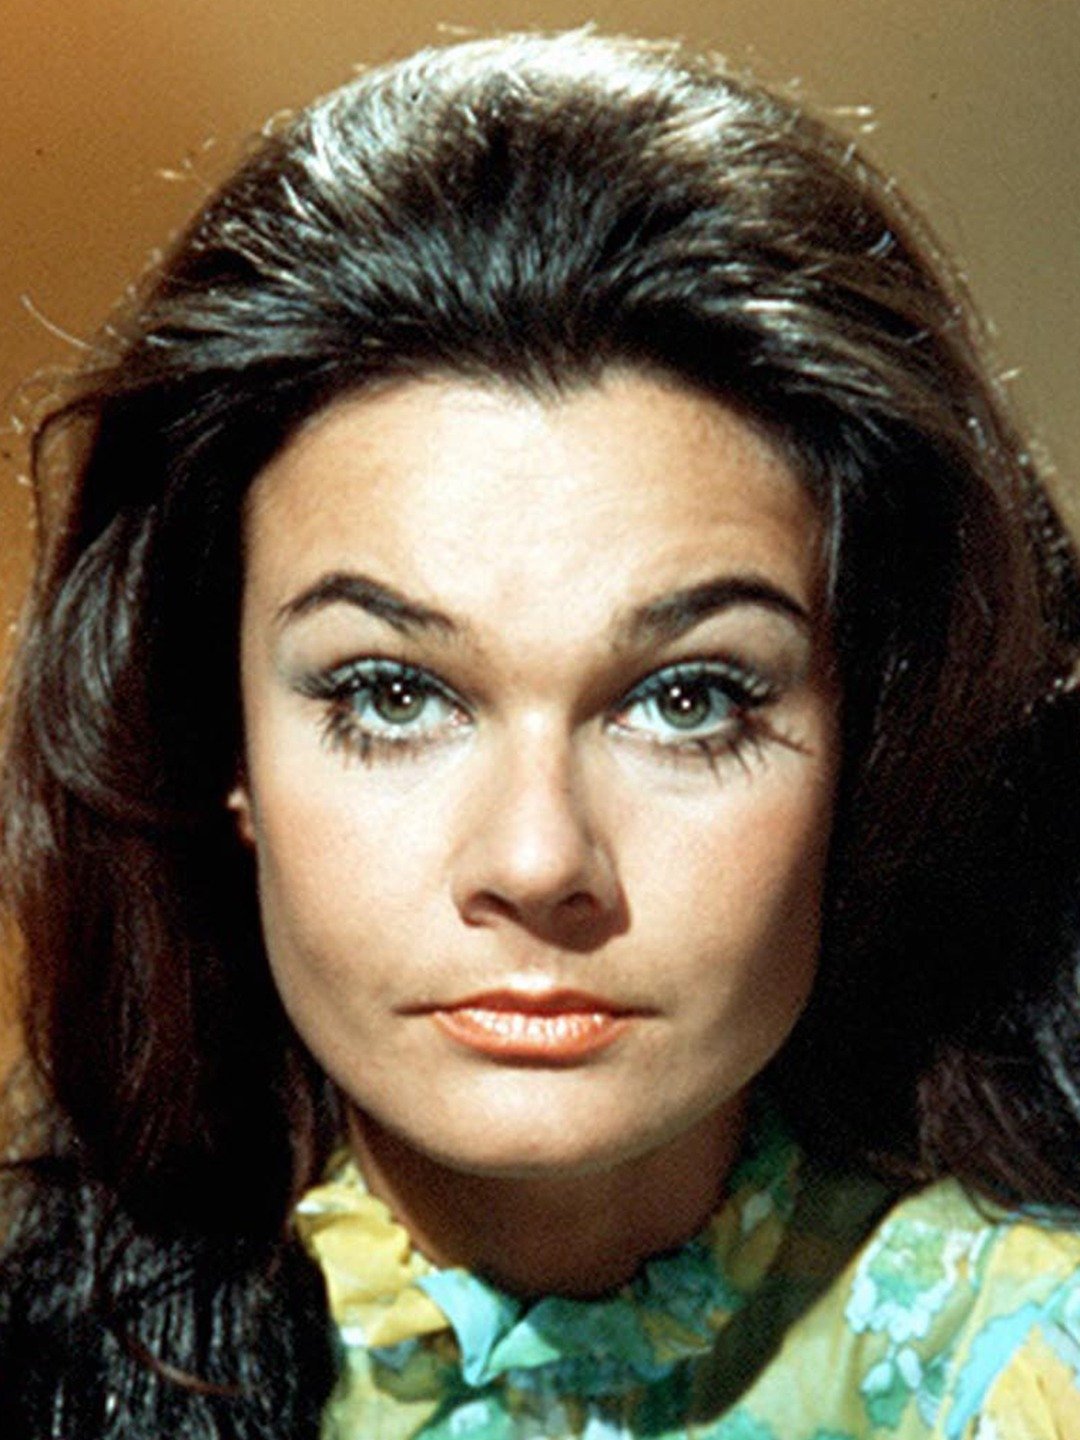 How tall is Imogen Hassall?